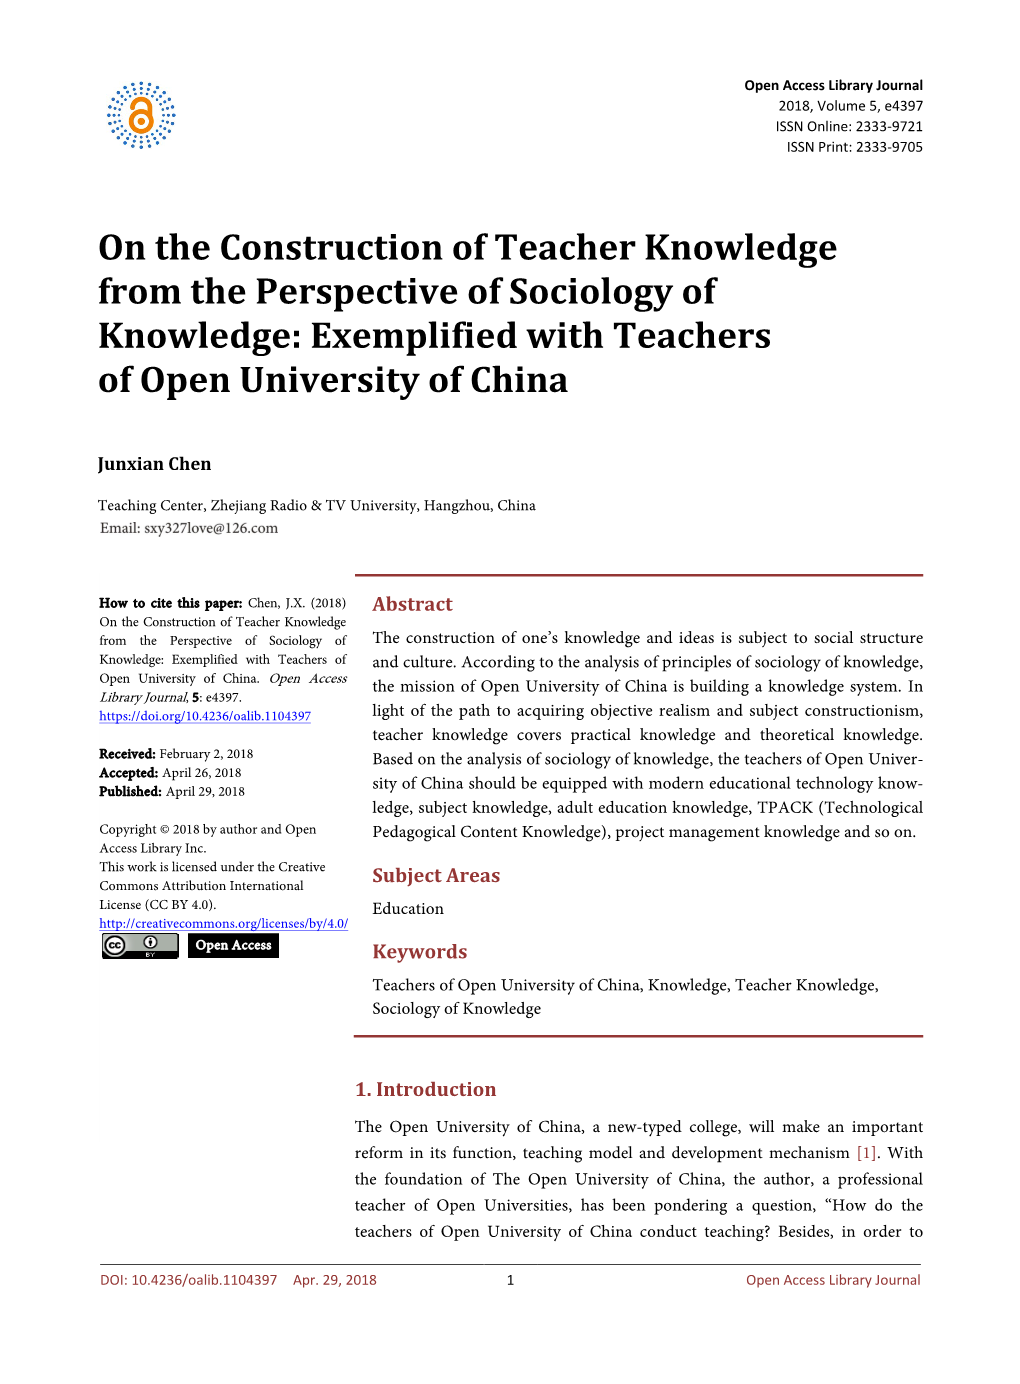 Exemplified with Teachers of Open University of China